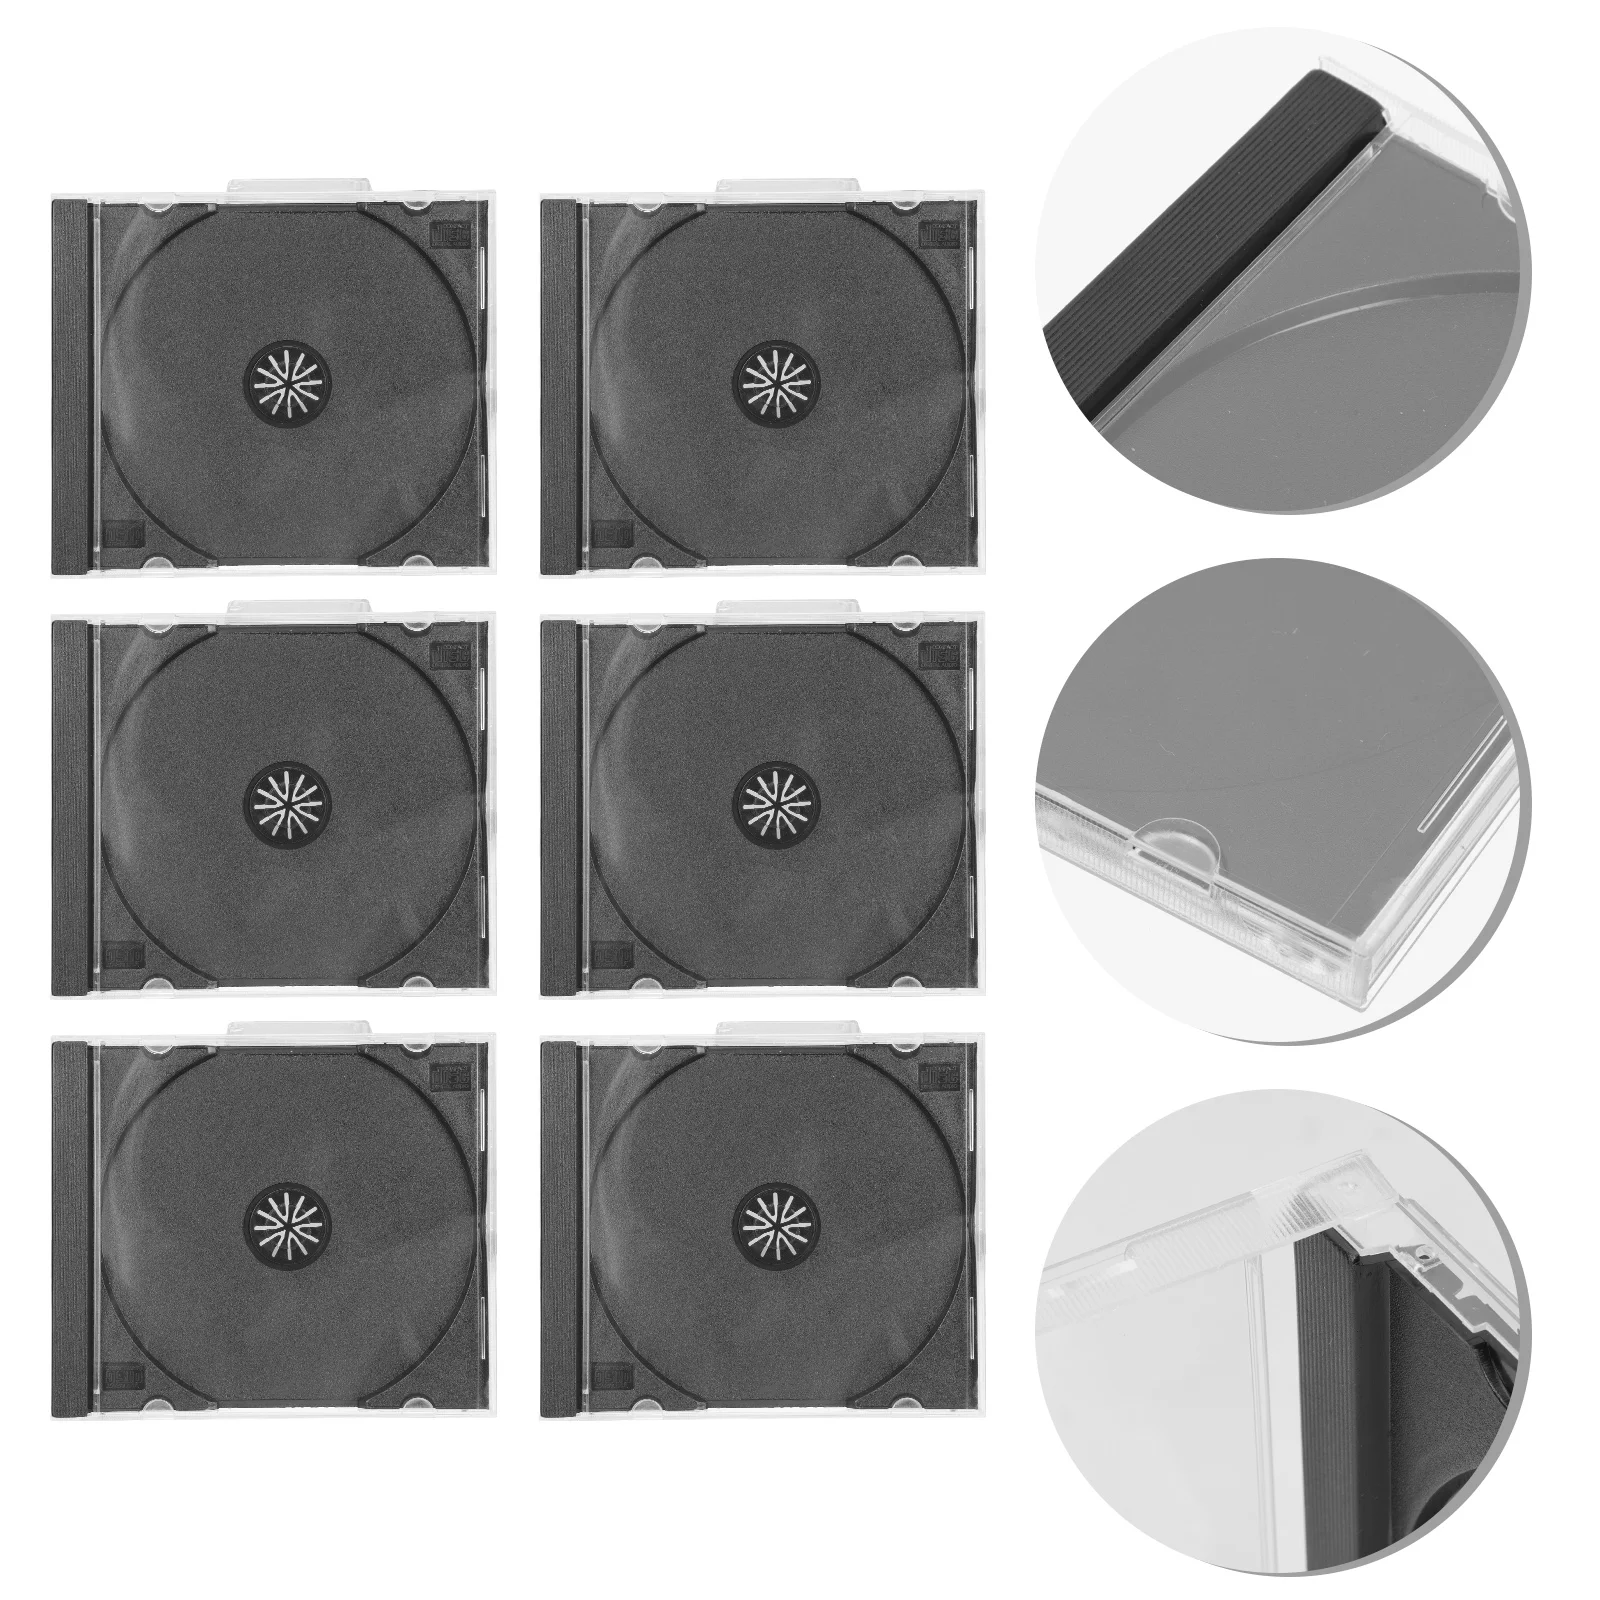 

6 Pcs CD Disc Case Protective Blank Cds Ultra Thin Plastic Storage DVD Container